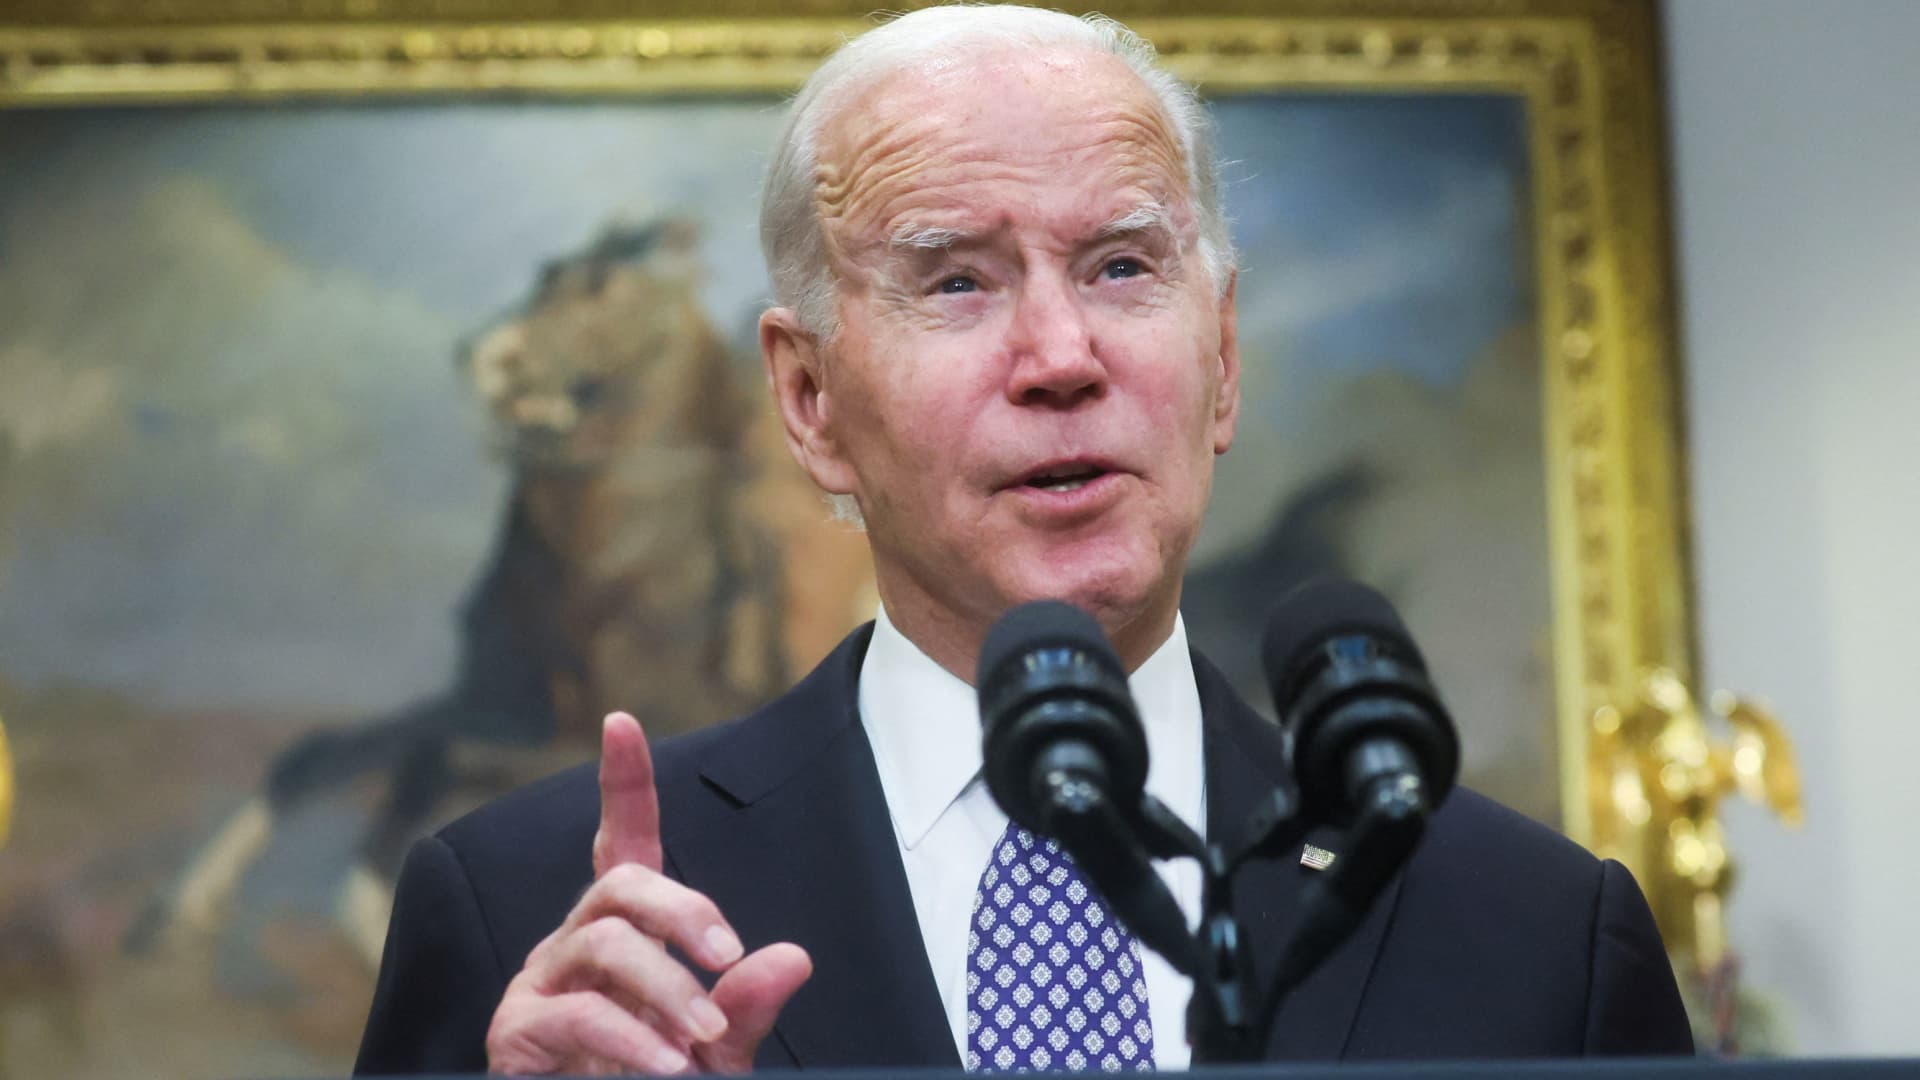 Biden threatens higher taxes on oil companies if they do not work to lower gas prices